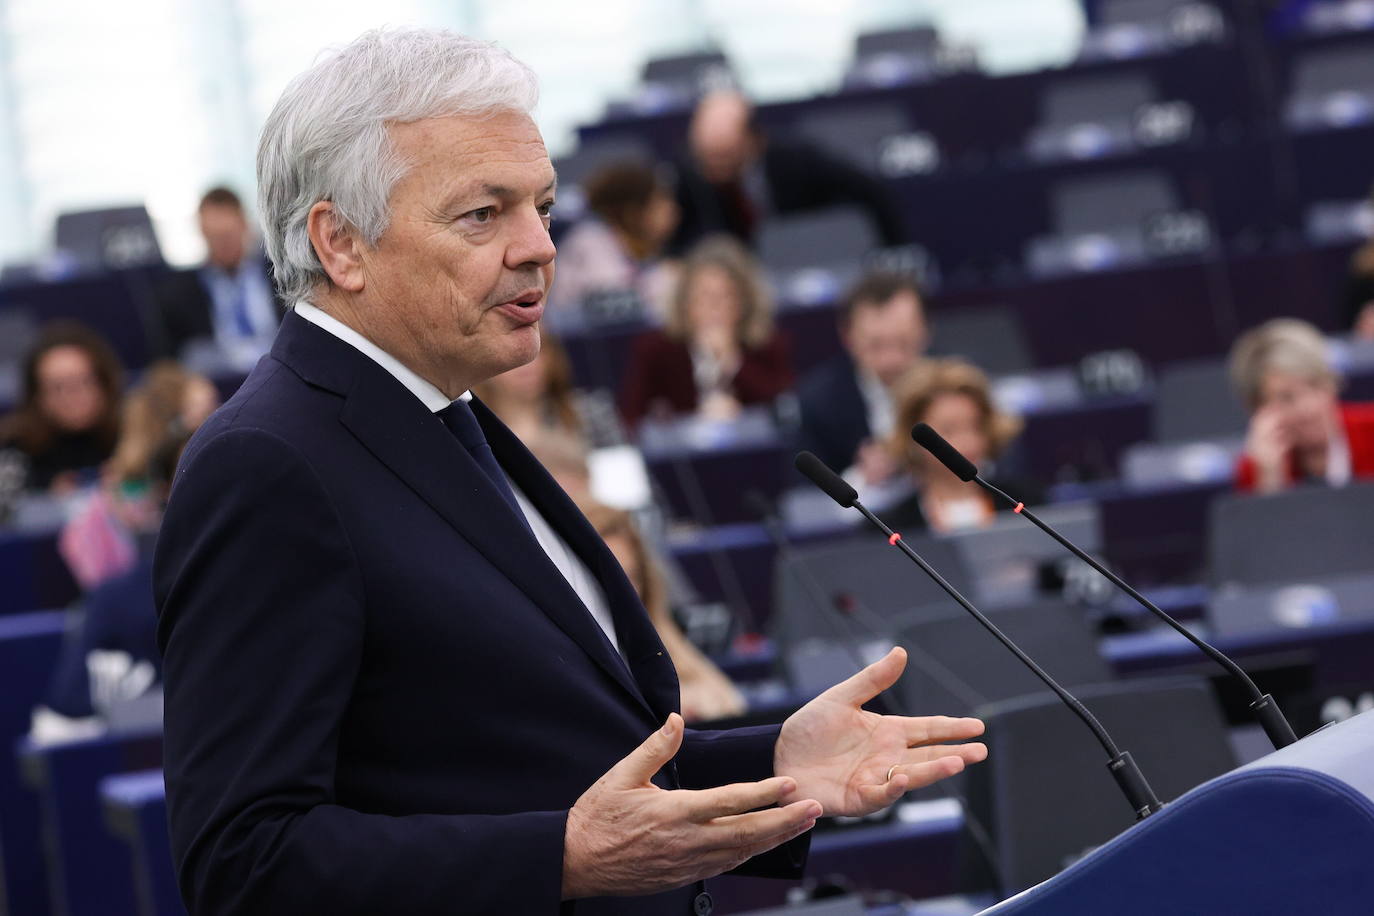 The Commissioner of Justice, Didier Reynders.